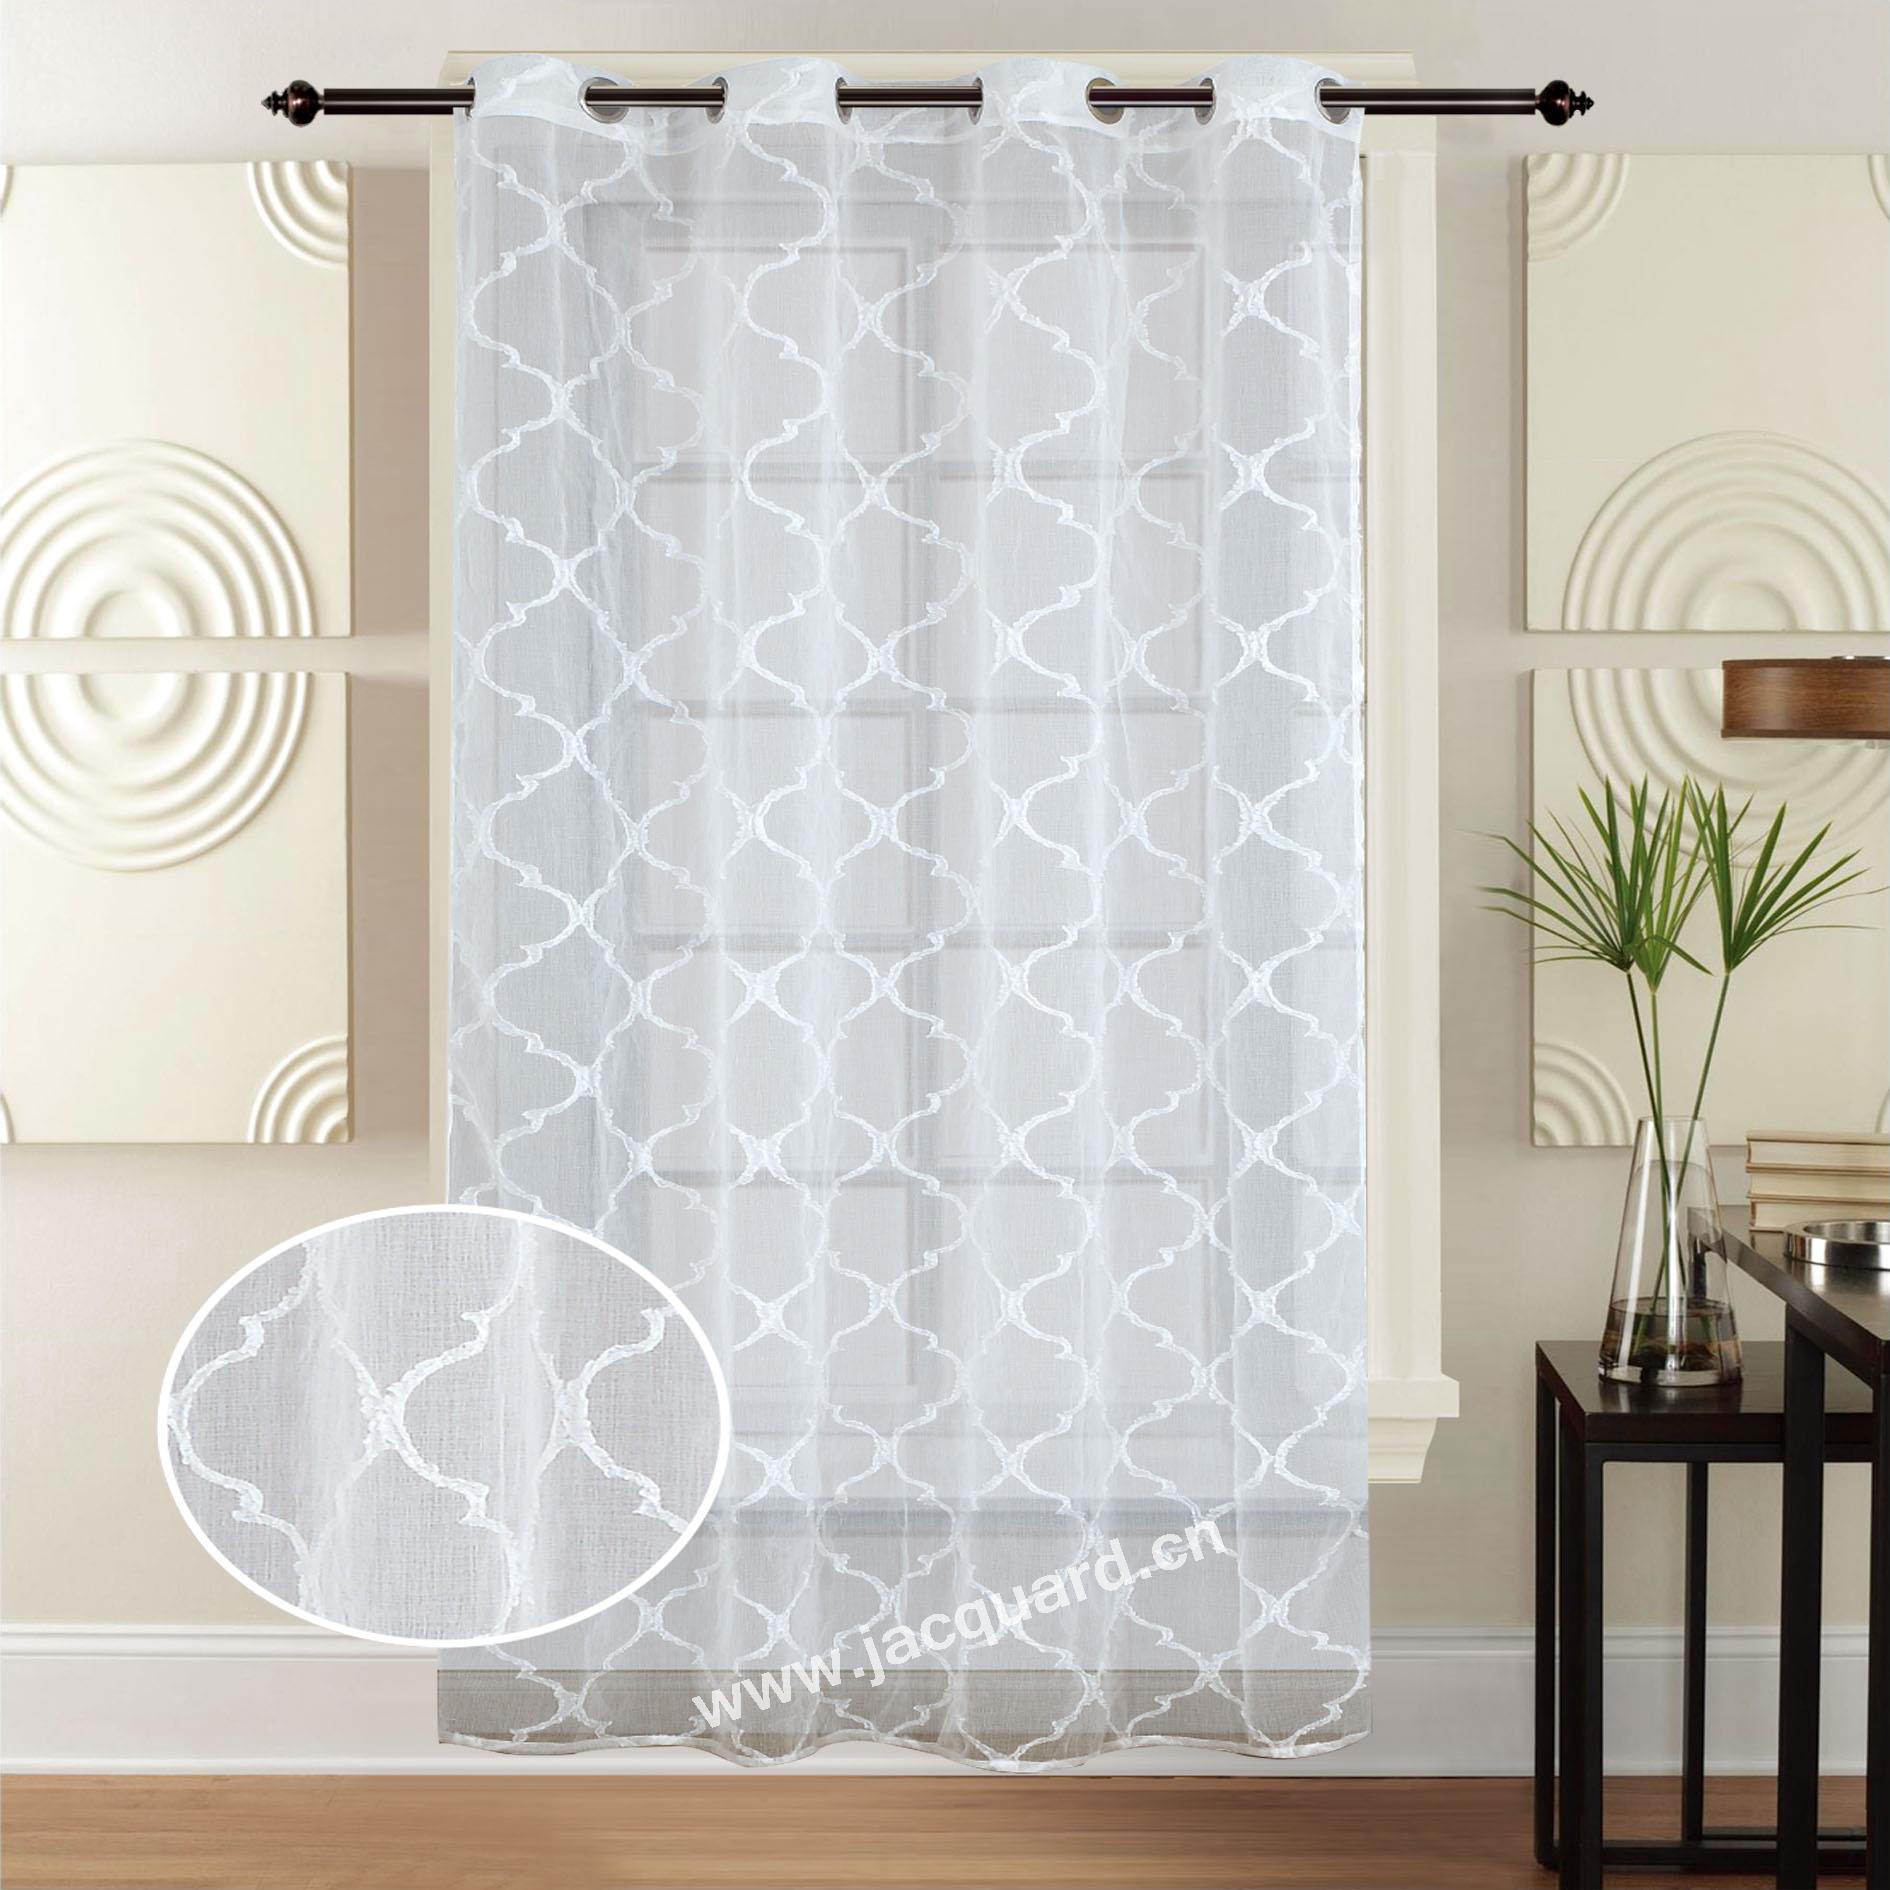 Tulle Curtains Decoratin Voile Sheer, Shower Curtain With Sheer Window